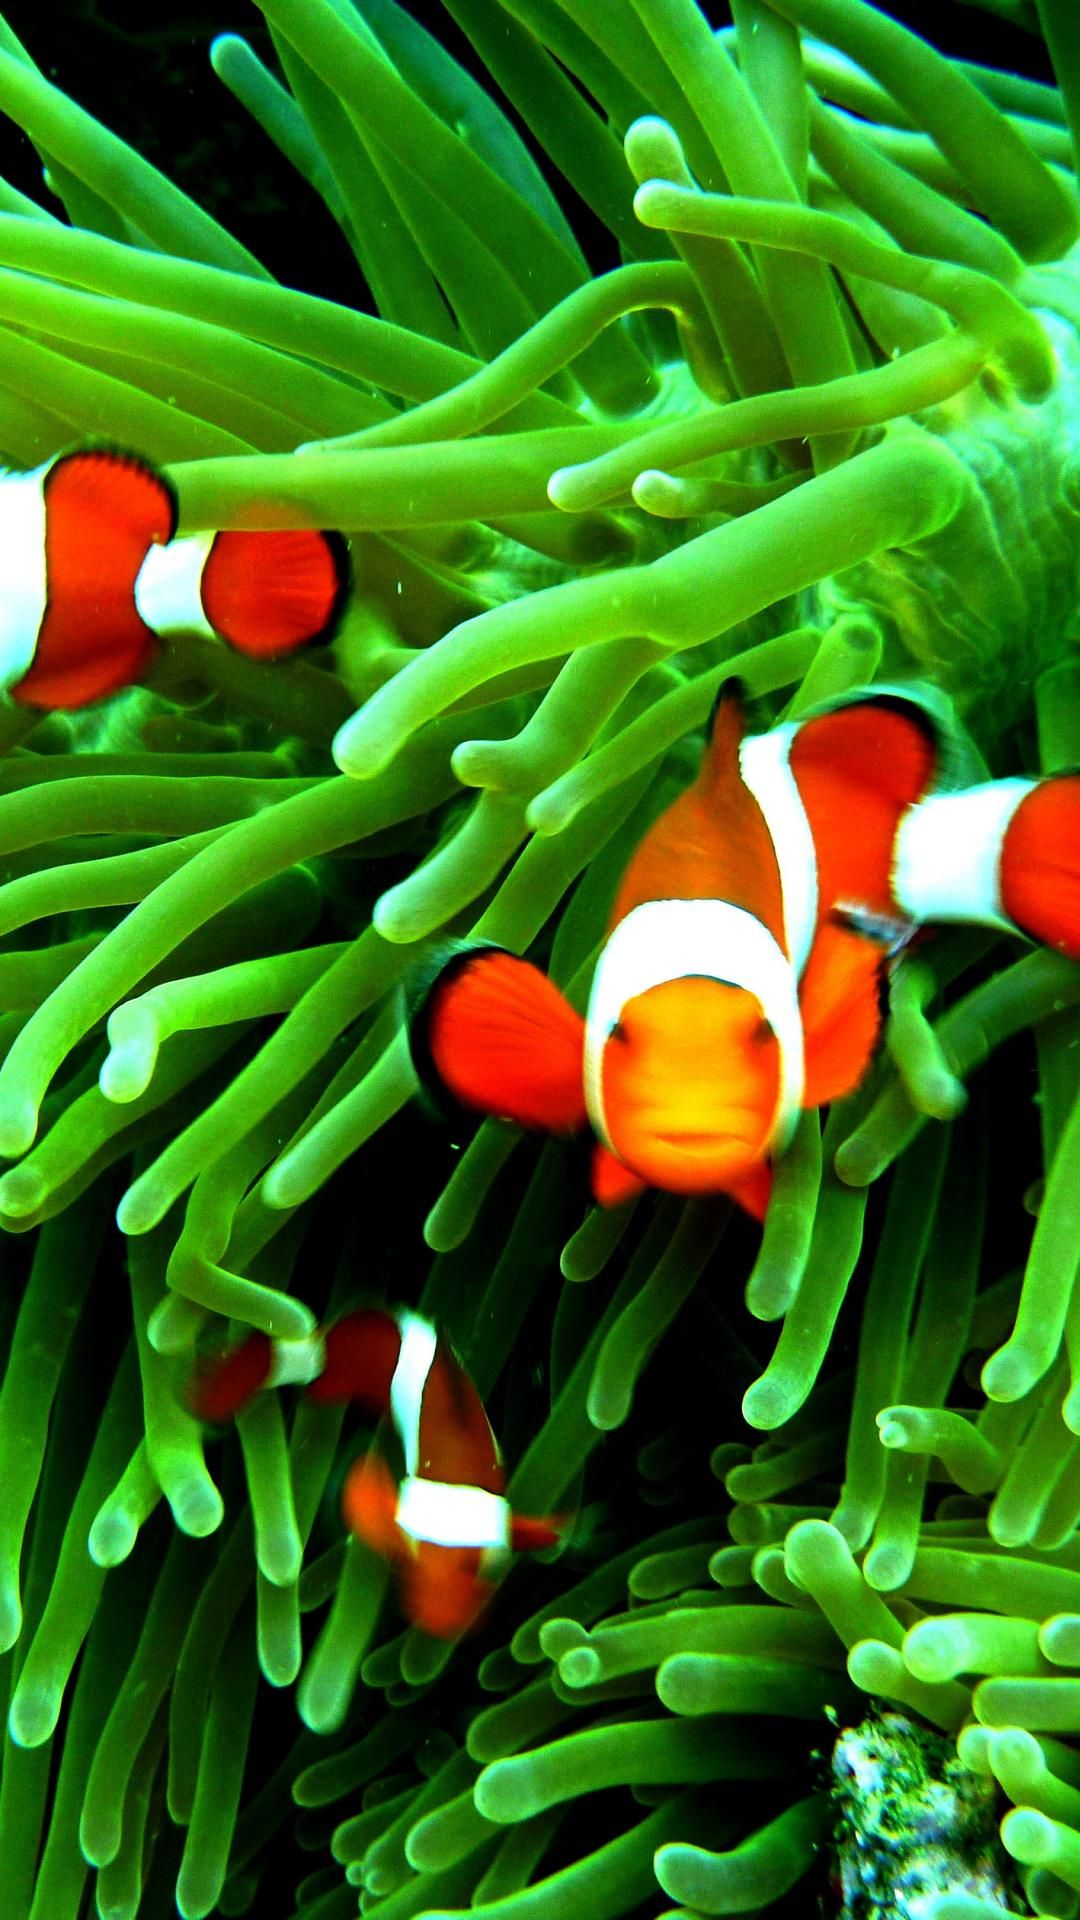 Iphone clownfish wallpaper k mywallpapers site animal wallpaper samsung wallpaper clown fish